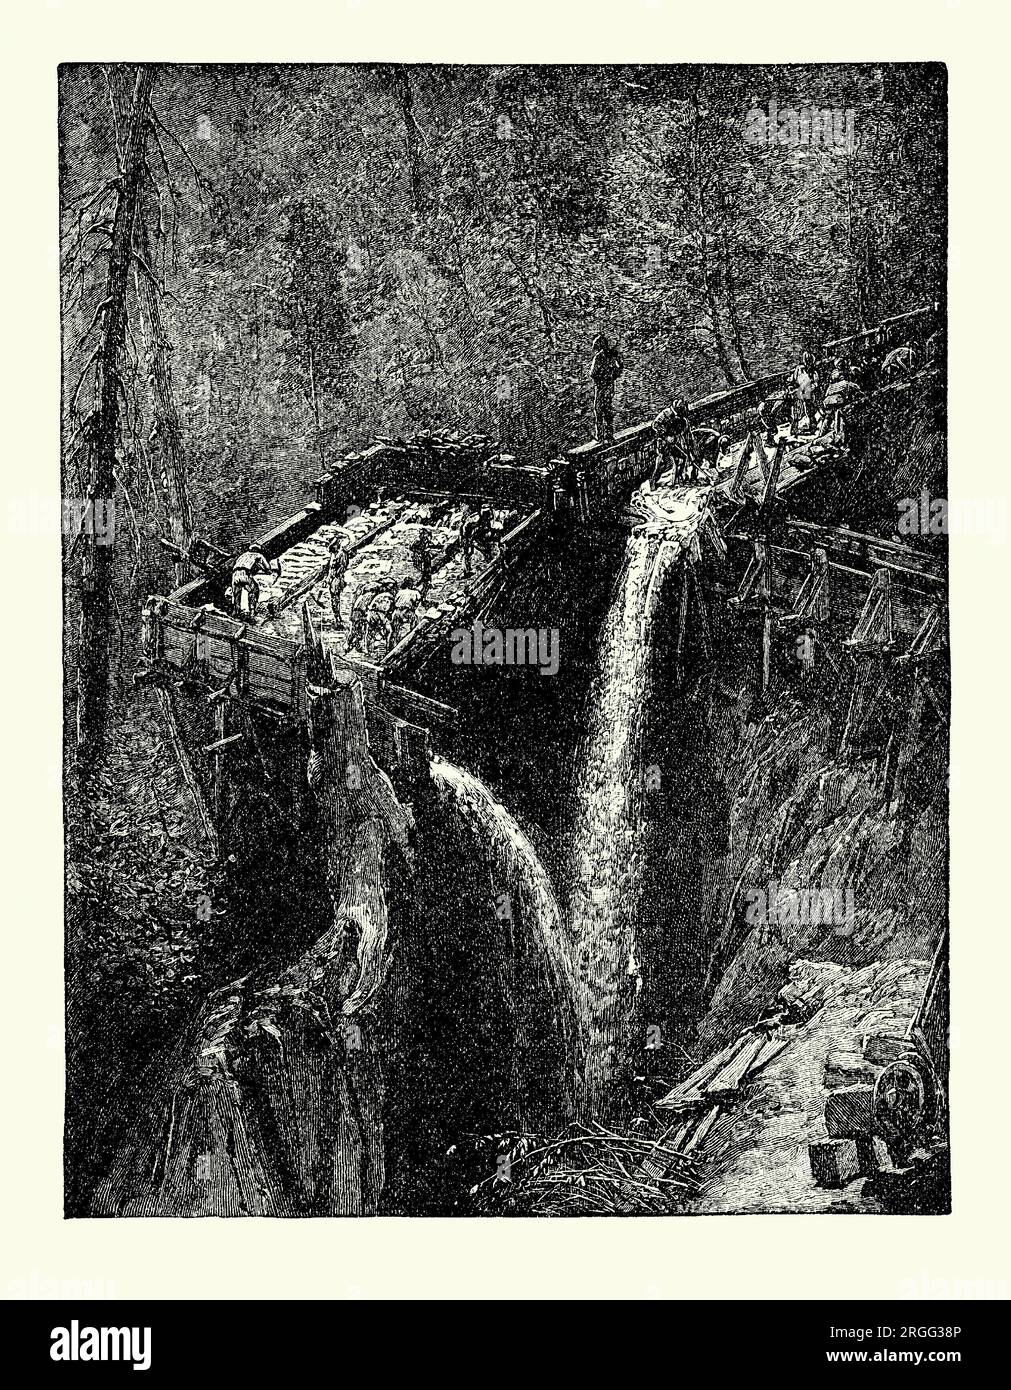 An old engraving of men searching for gold in water sluices and races in 1848, the earliest times of the California gold rush in the Sierra Nevada foothills, California, USA. It is from an American history book of 1895. Gold was first discovered at Sutter’s Mill (after its owner John Sutter), a water-powered sawmill on the bank of the South Fork American River in the Sierra Nevada, California. A worker constructing the mill, James W Marshall, found gold there in 1848. This discovery set off the California Gold Rush of 1848–1855. Stock Photo